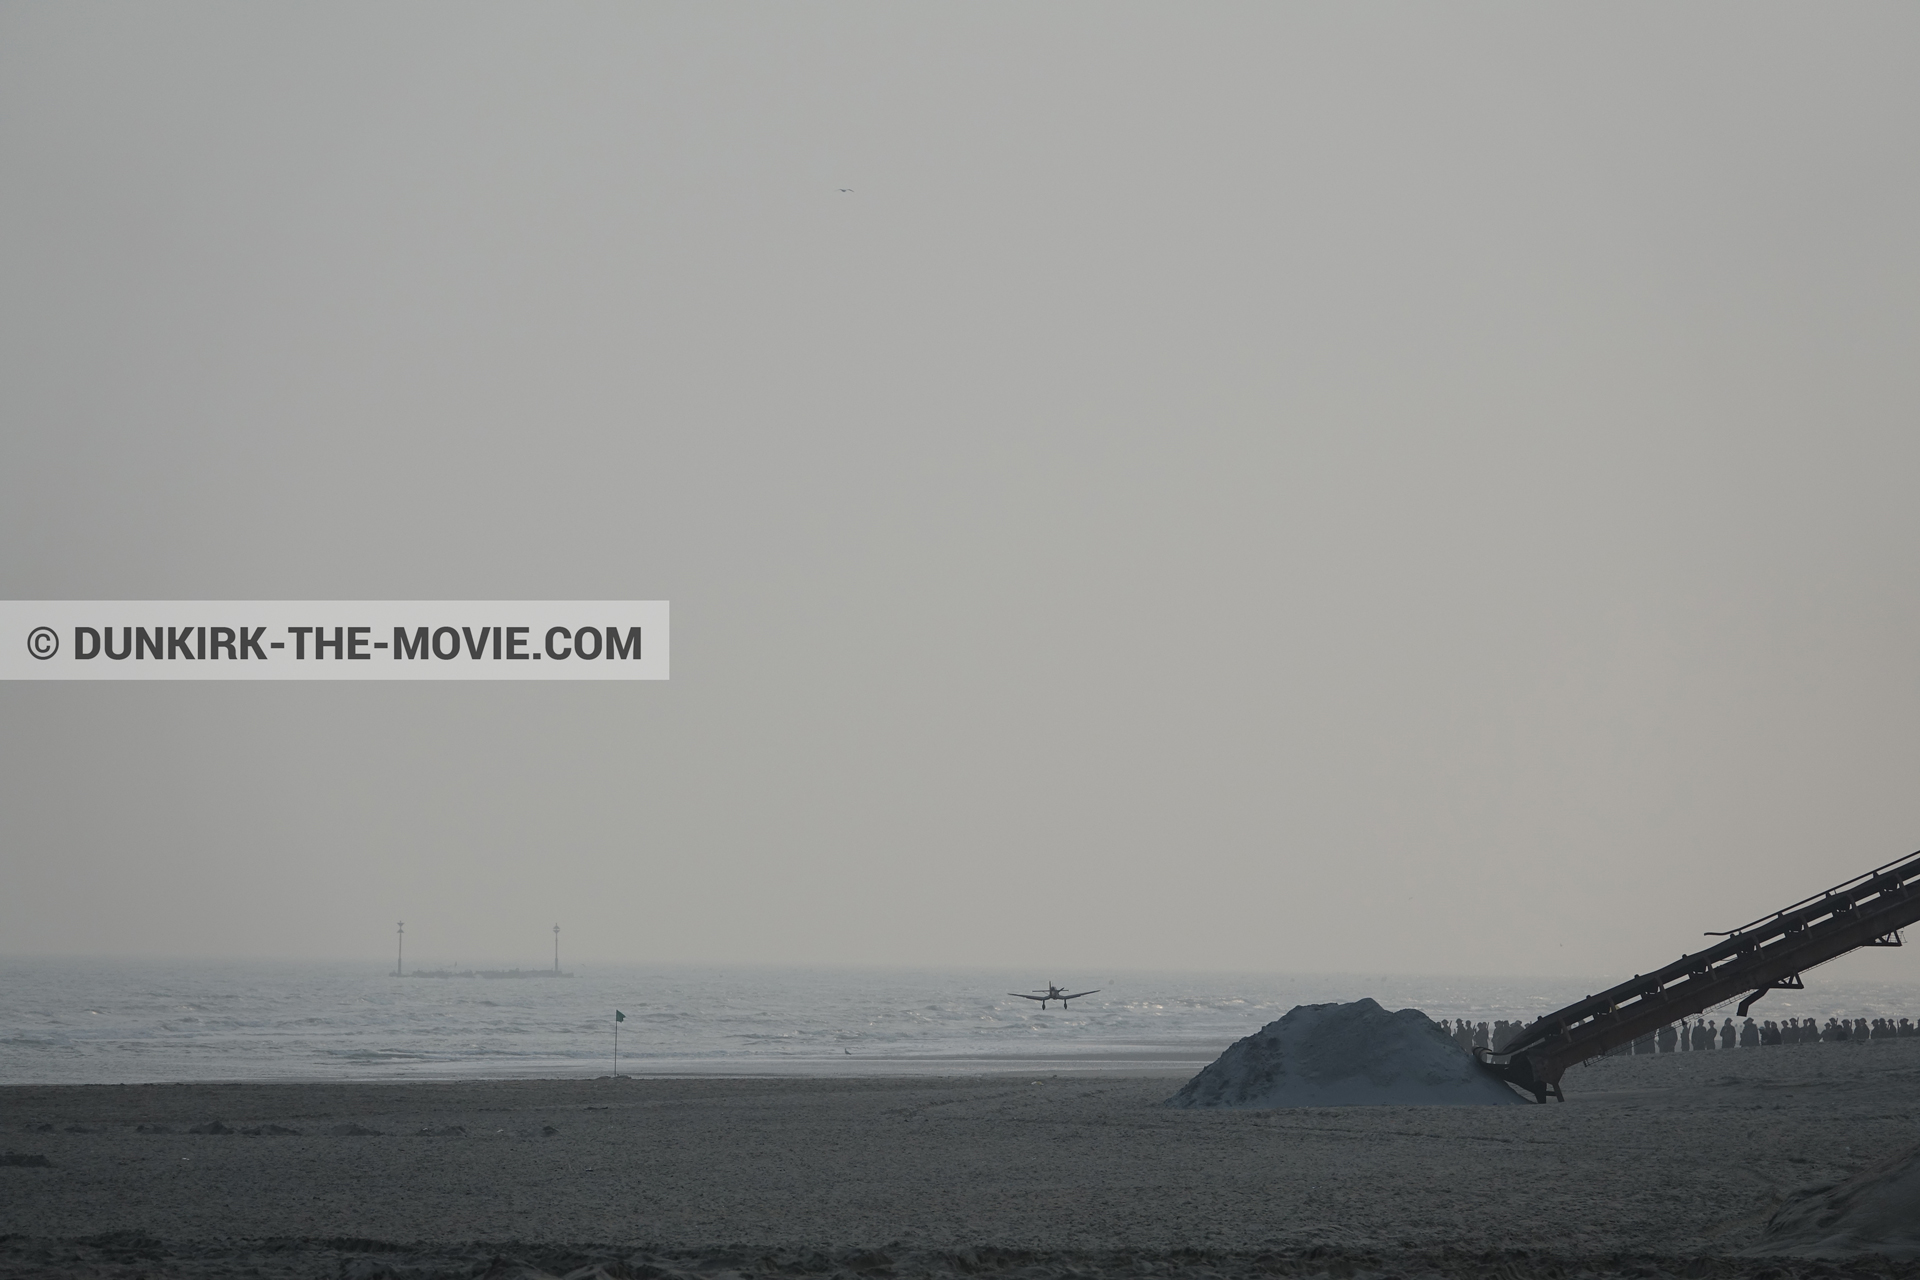 Picture with plane, grey sky, decor, supernumeraries, beach,  from behind the scene of the Dunkirk movie by Nolan